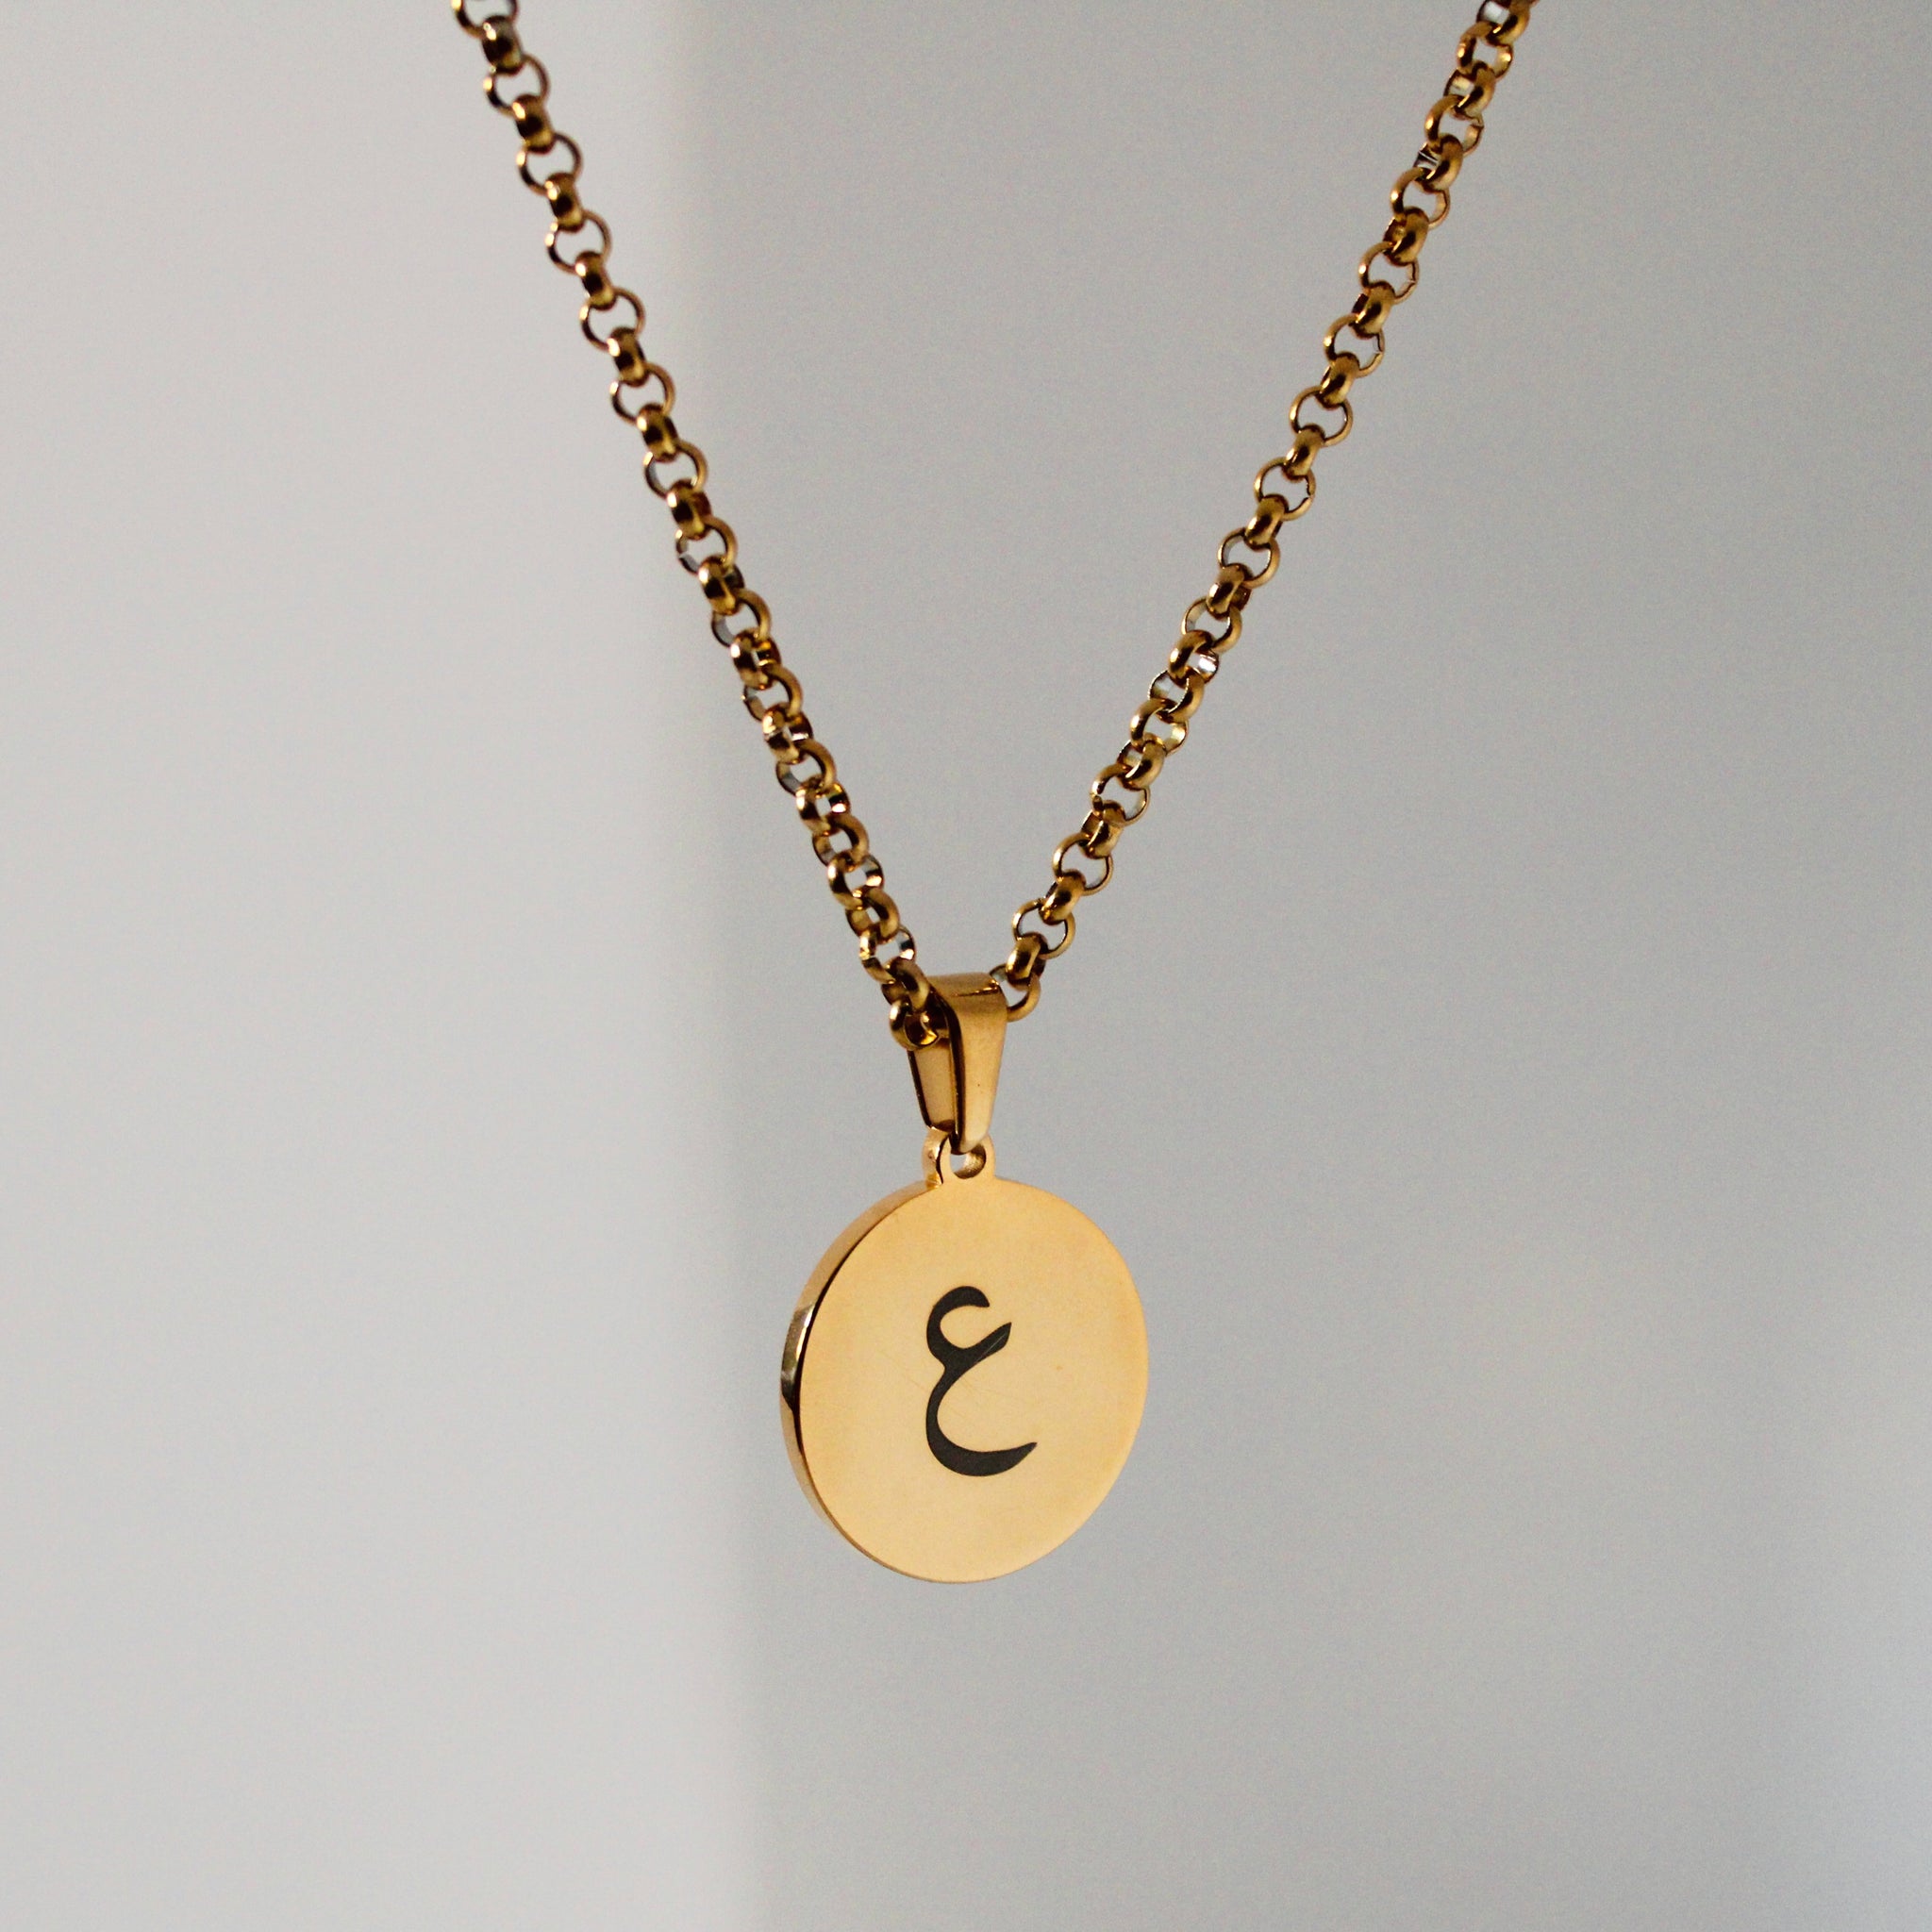 Gold Plated Handmade Arabic Letter Coin Pendant, Dainty Minimalistic Initial  Charm Necklace-K - Necklaces | Facebook Marketplace | Facebook